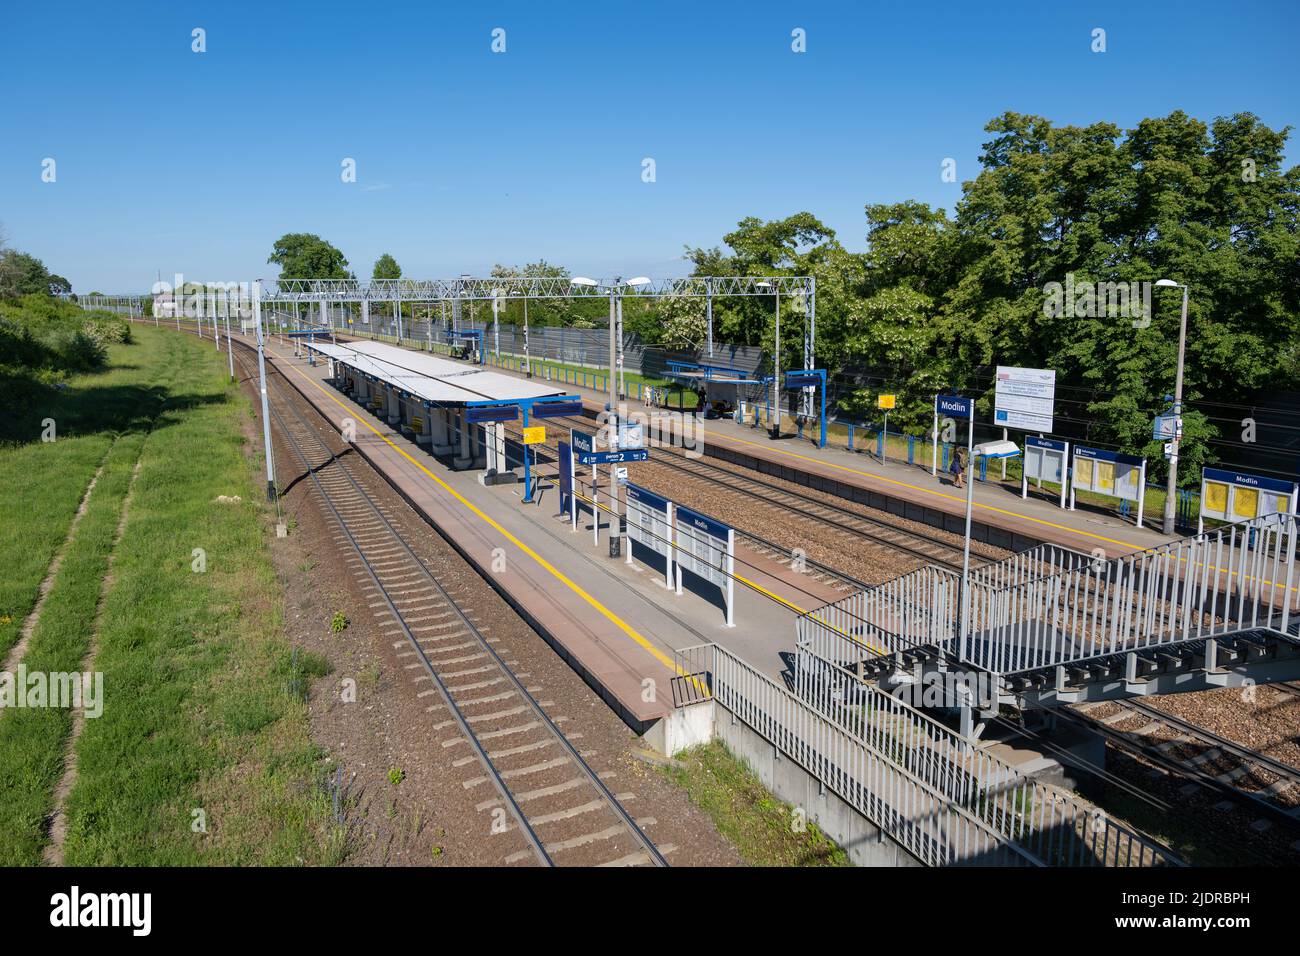 Modlin train station in Modlin, Masovia, Poland. Railway station for the Modlin Airport and Modlin Fortress. Stock Photo